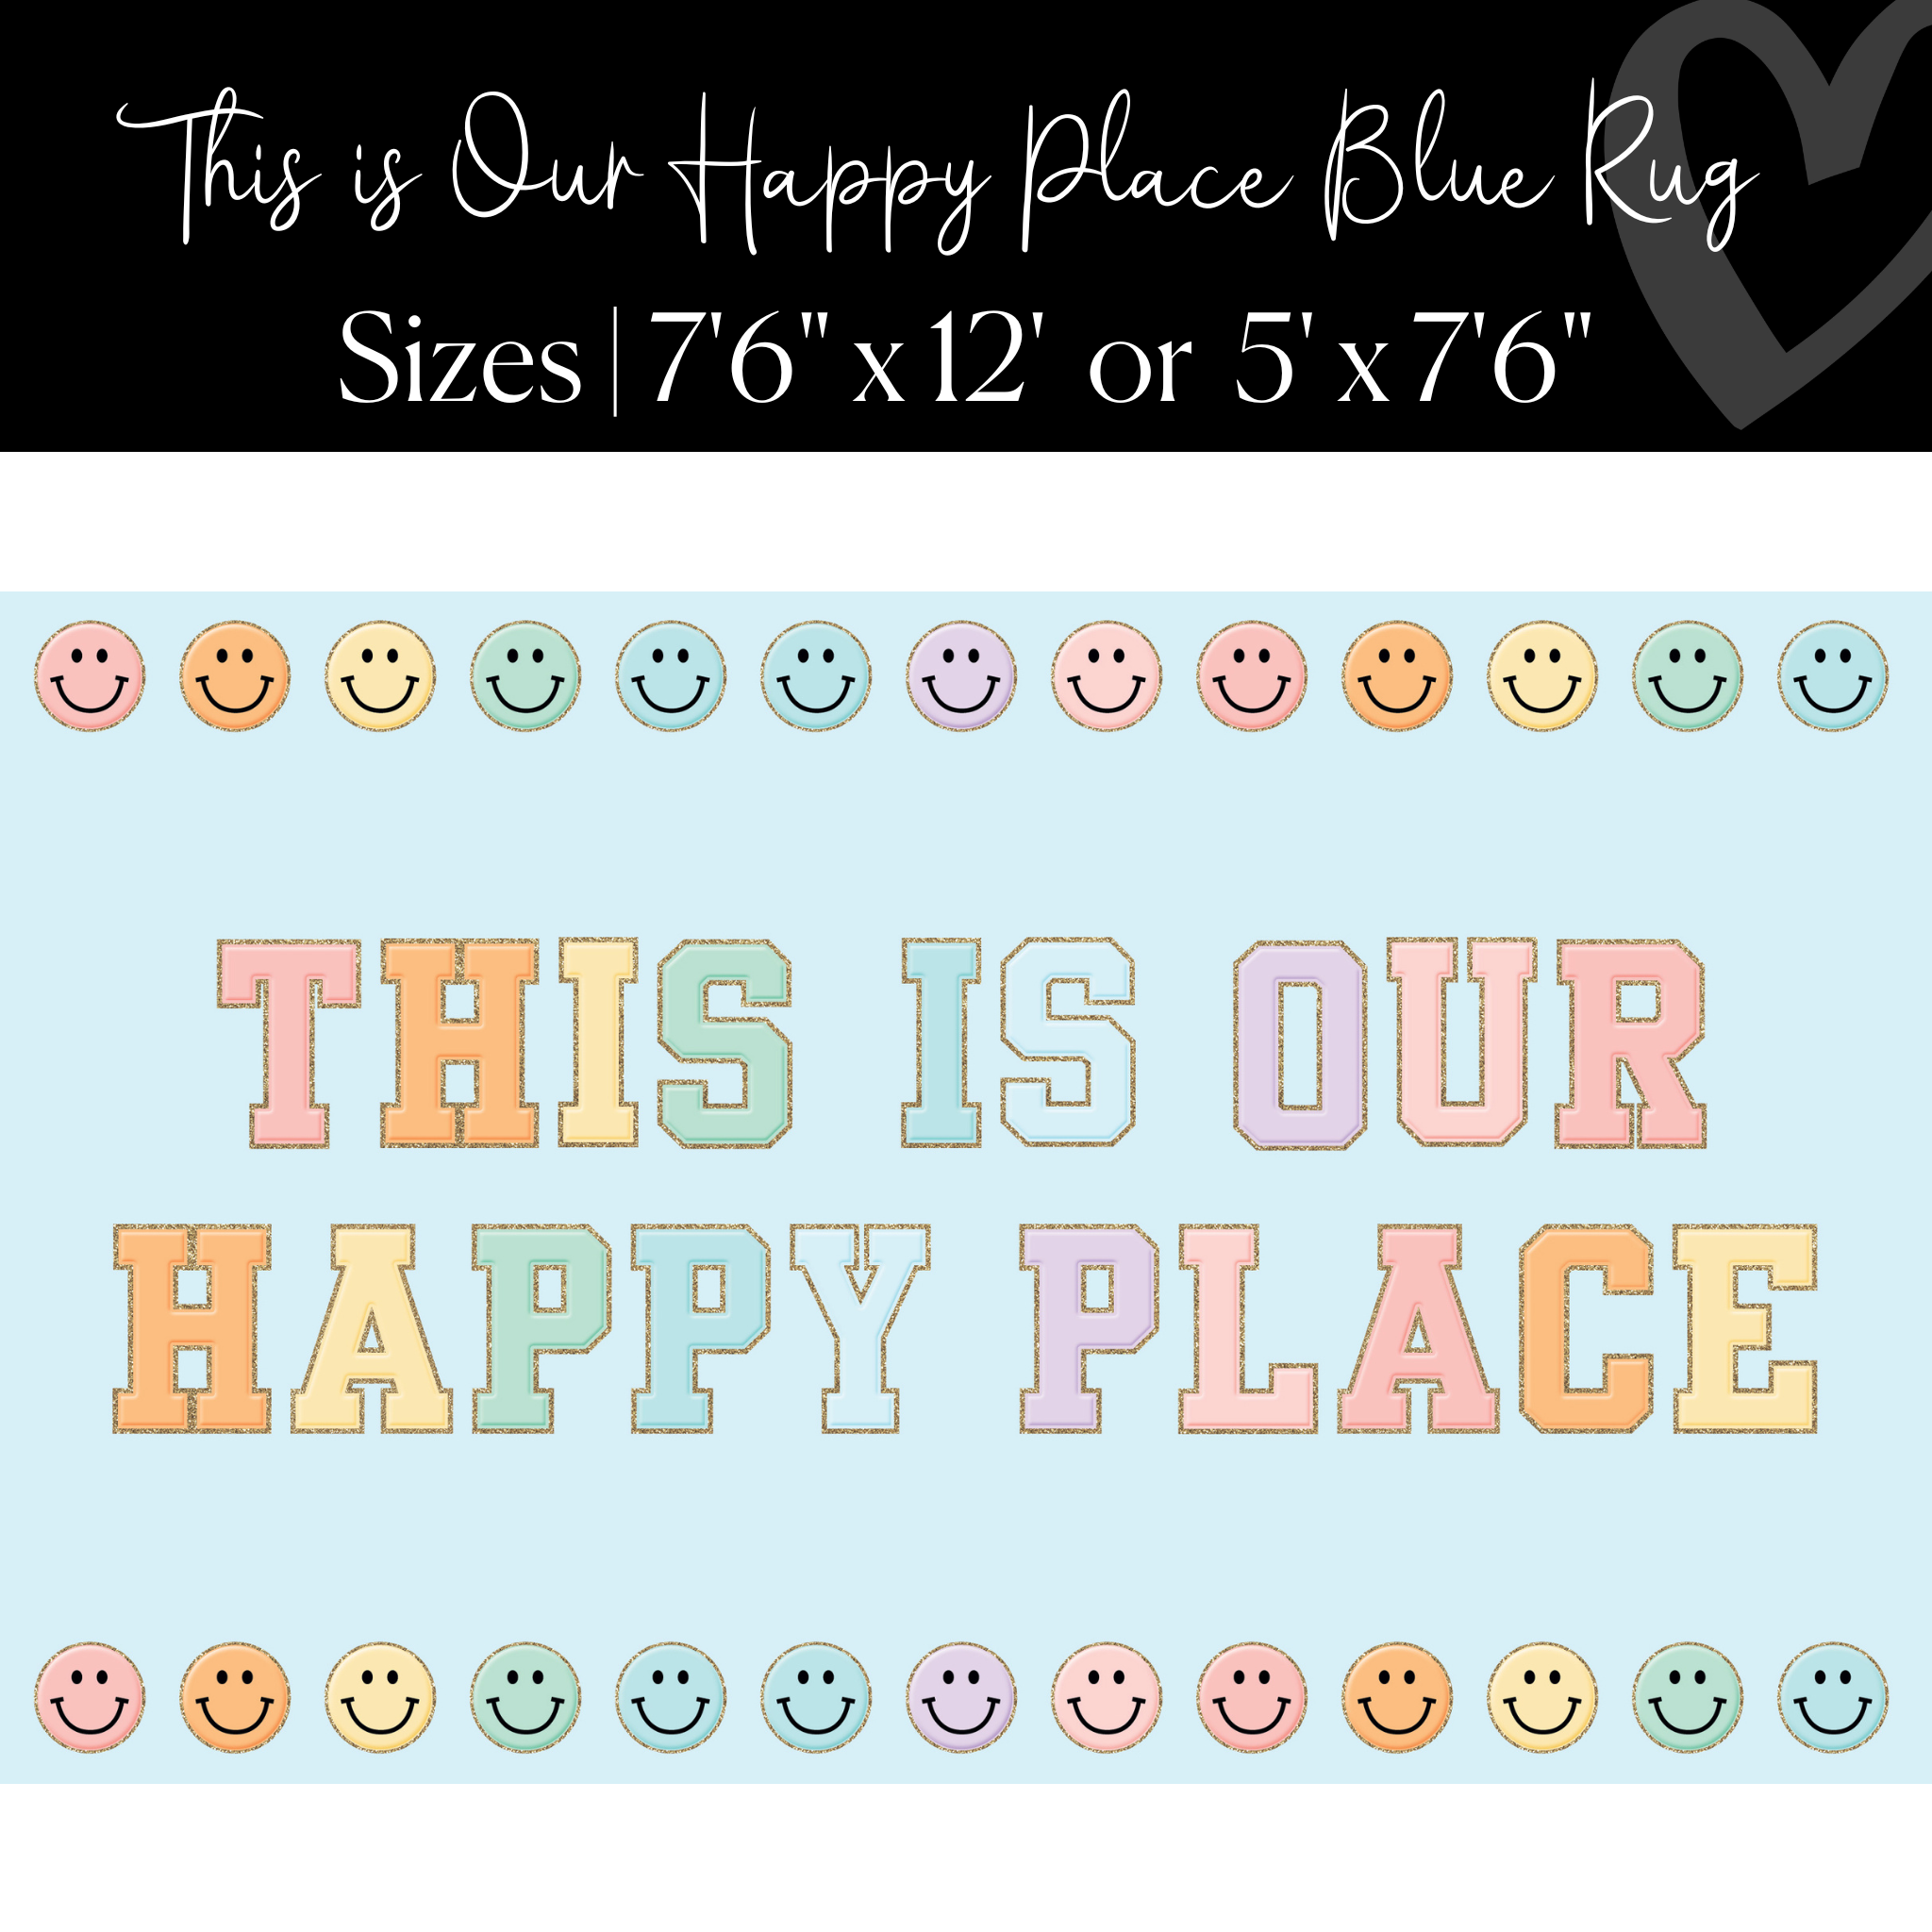 Sky Blue "This is Our Happy Place" Rug | Rainbow Classroom Rug | Pastel Classroom Rug | Schoolgirl Style